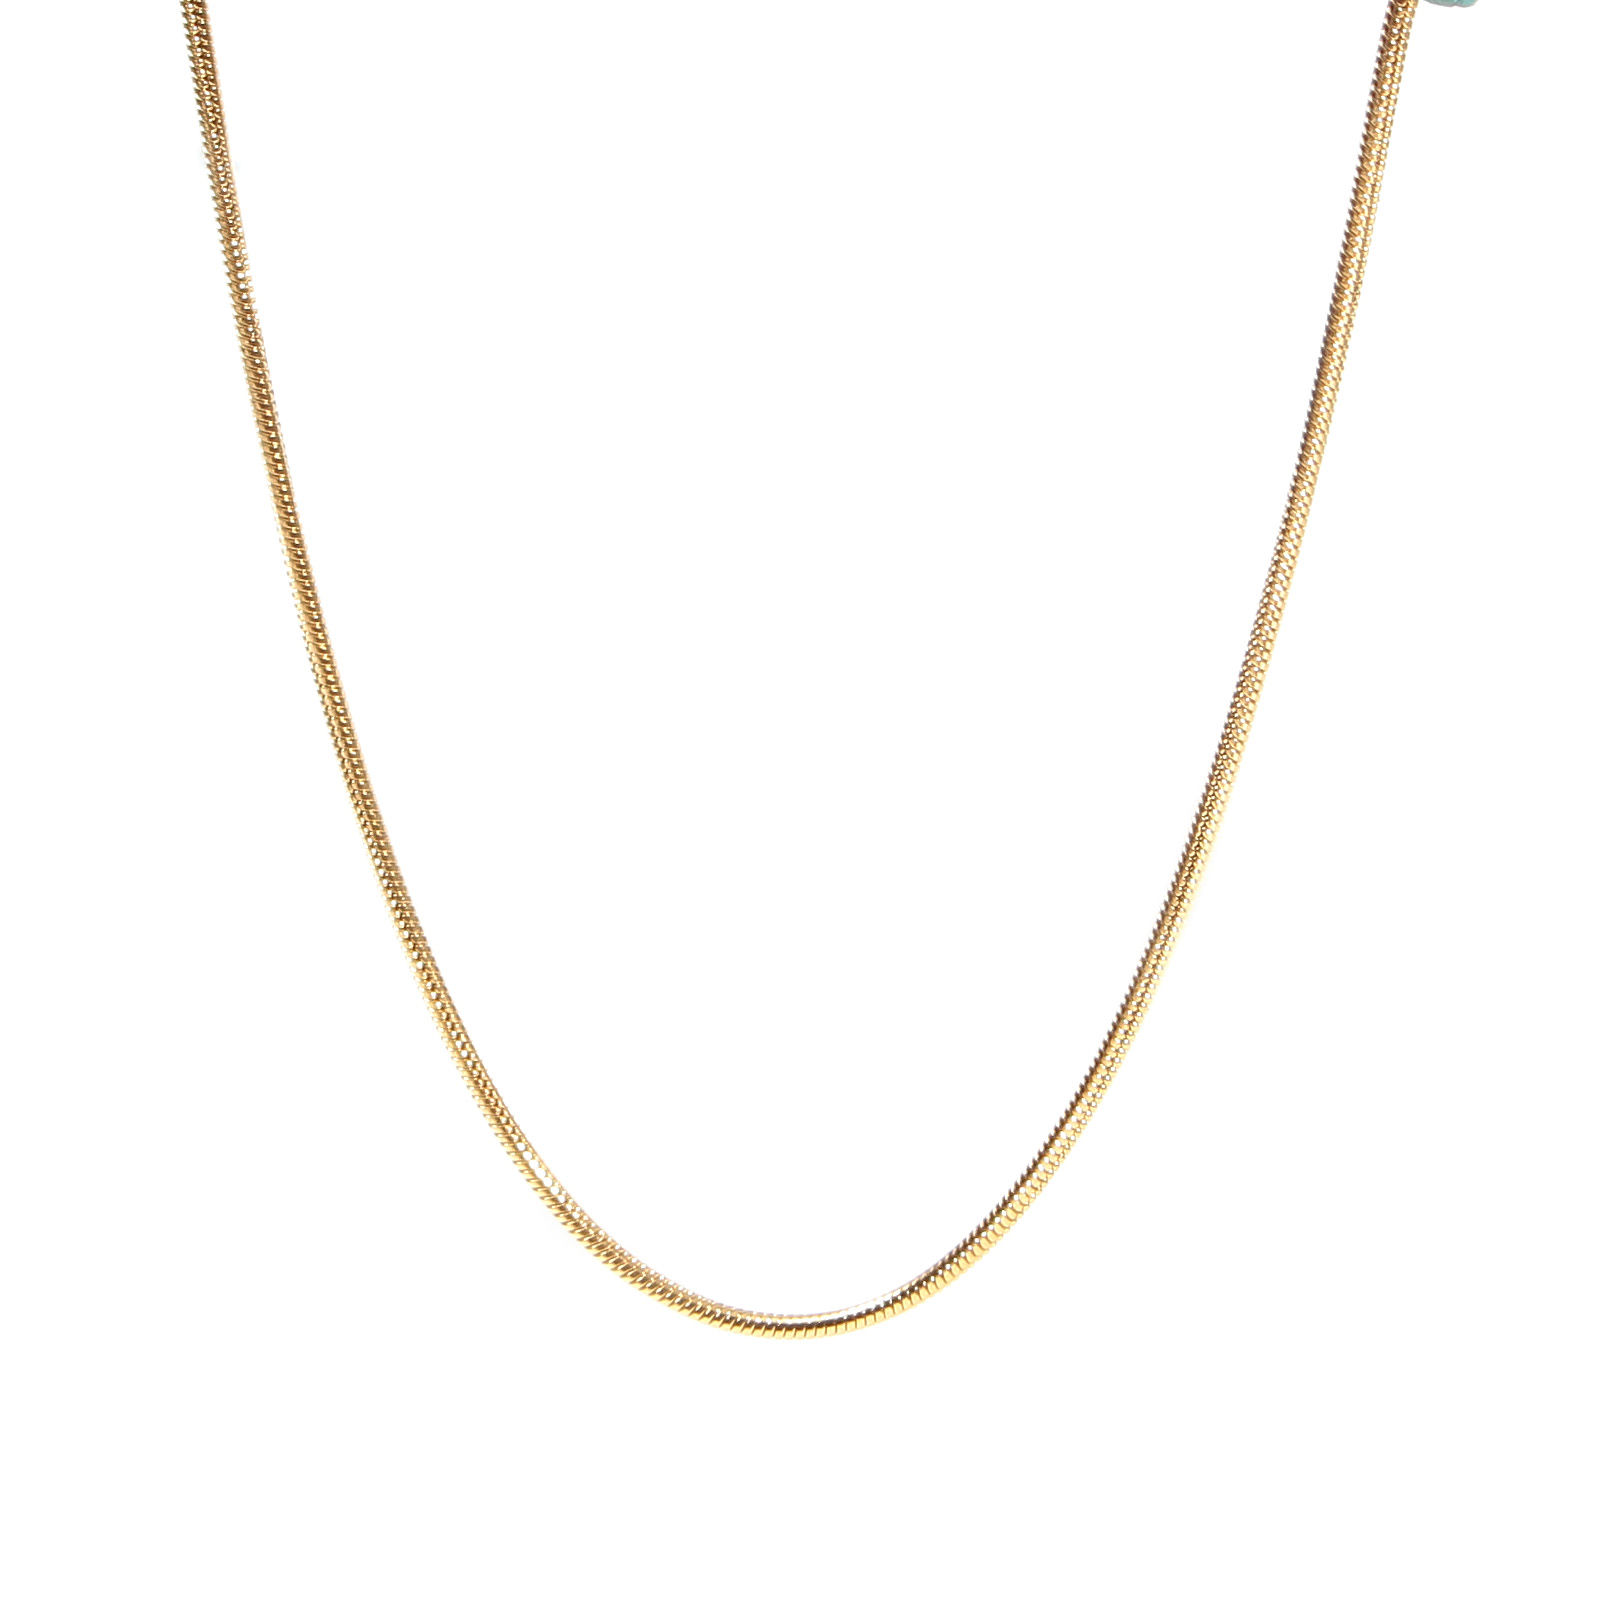 Picture of Stainless Steel Snake Chain Necklace Gold Plated 60cm(23 5/8") long, 1 Piece